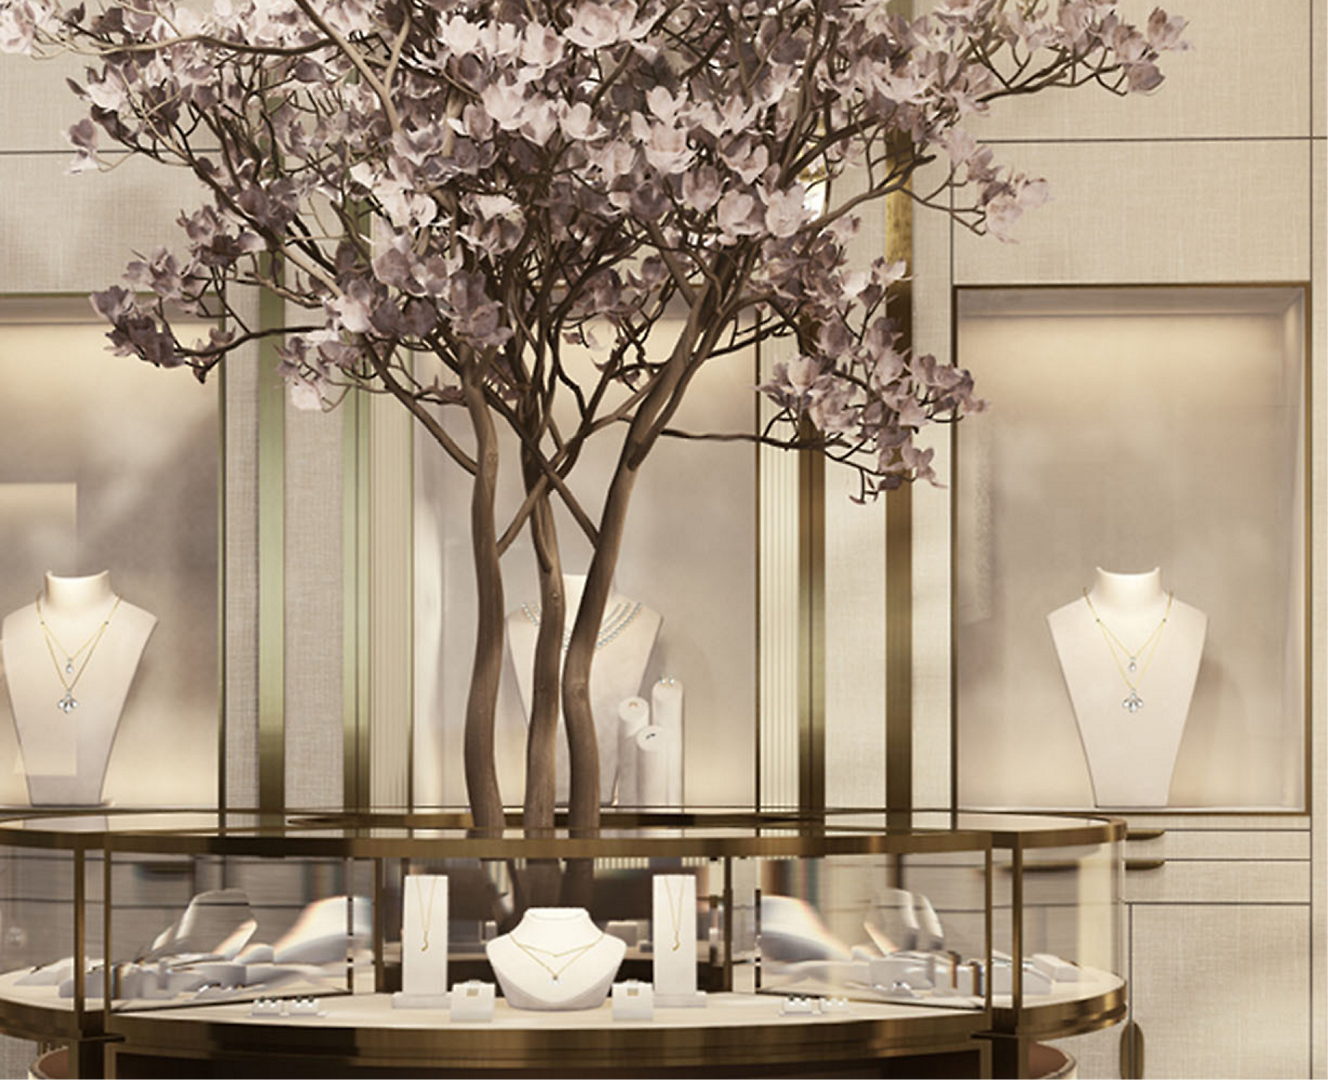 A tree with flowers in a jewelry store.